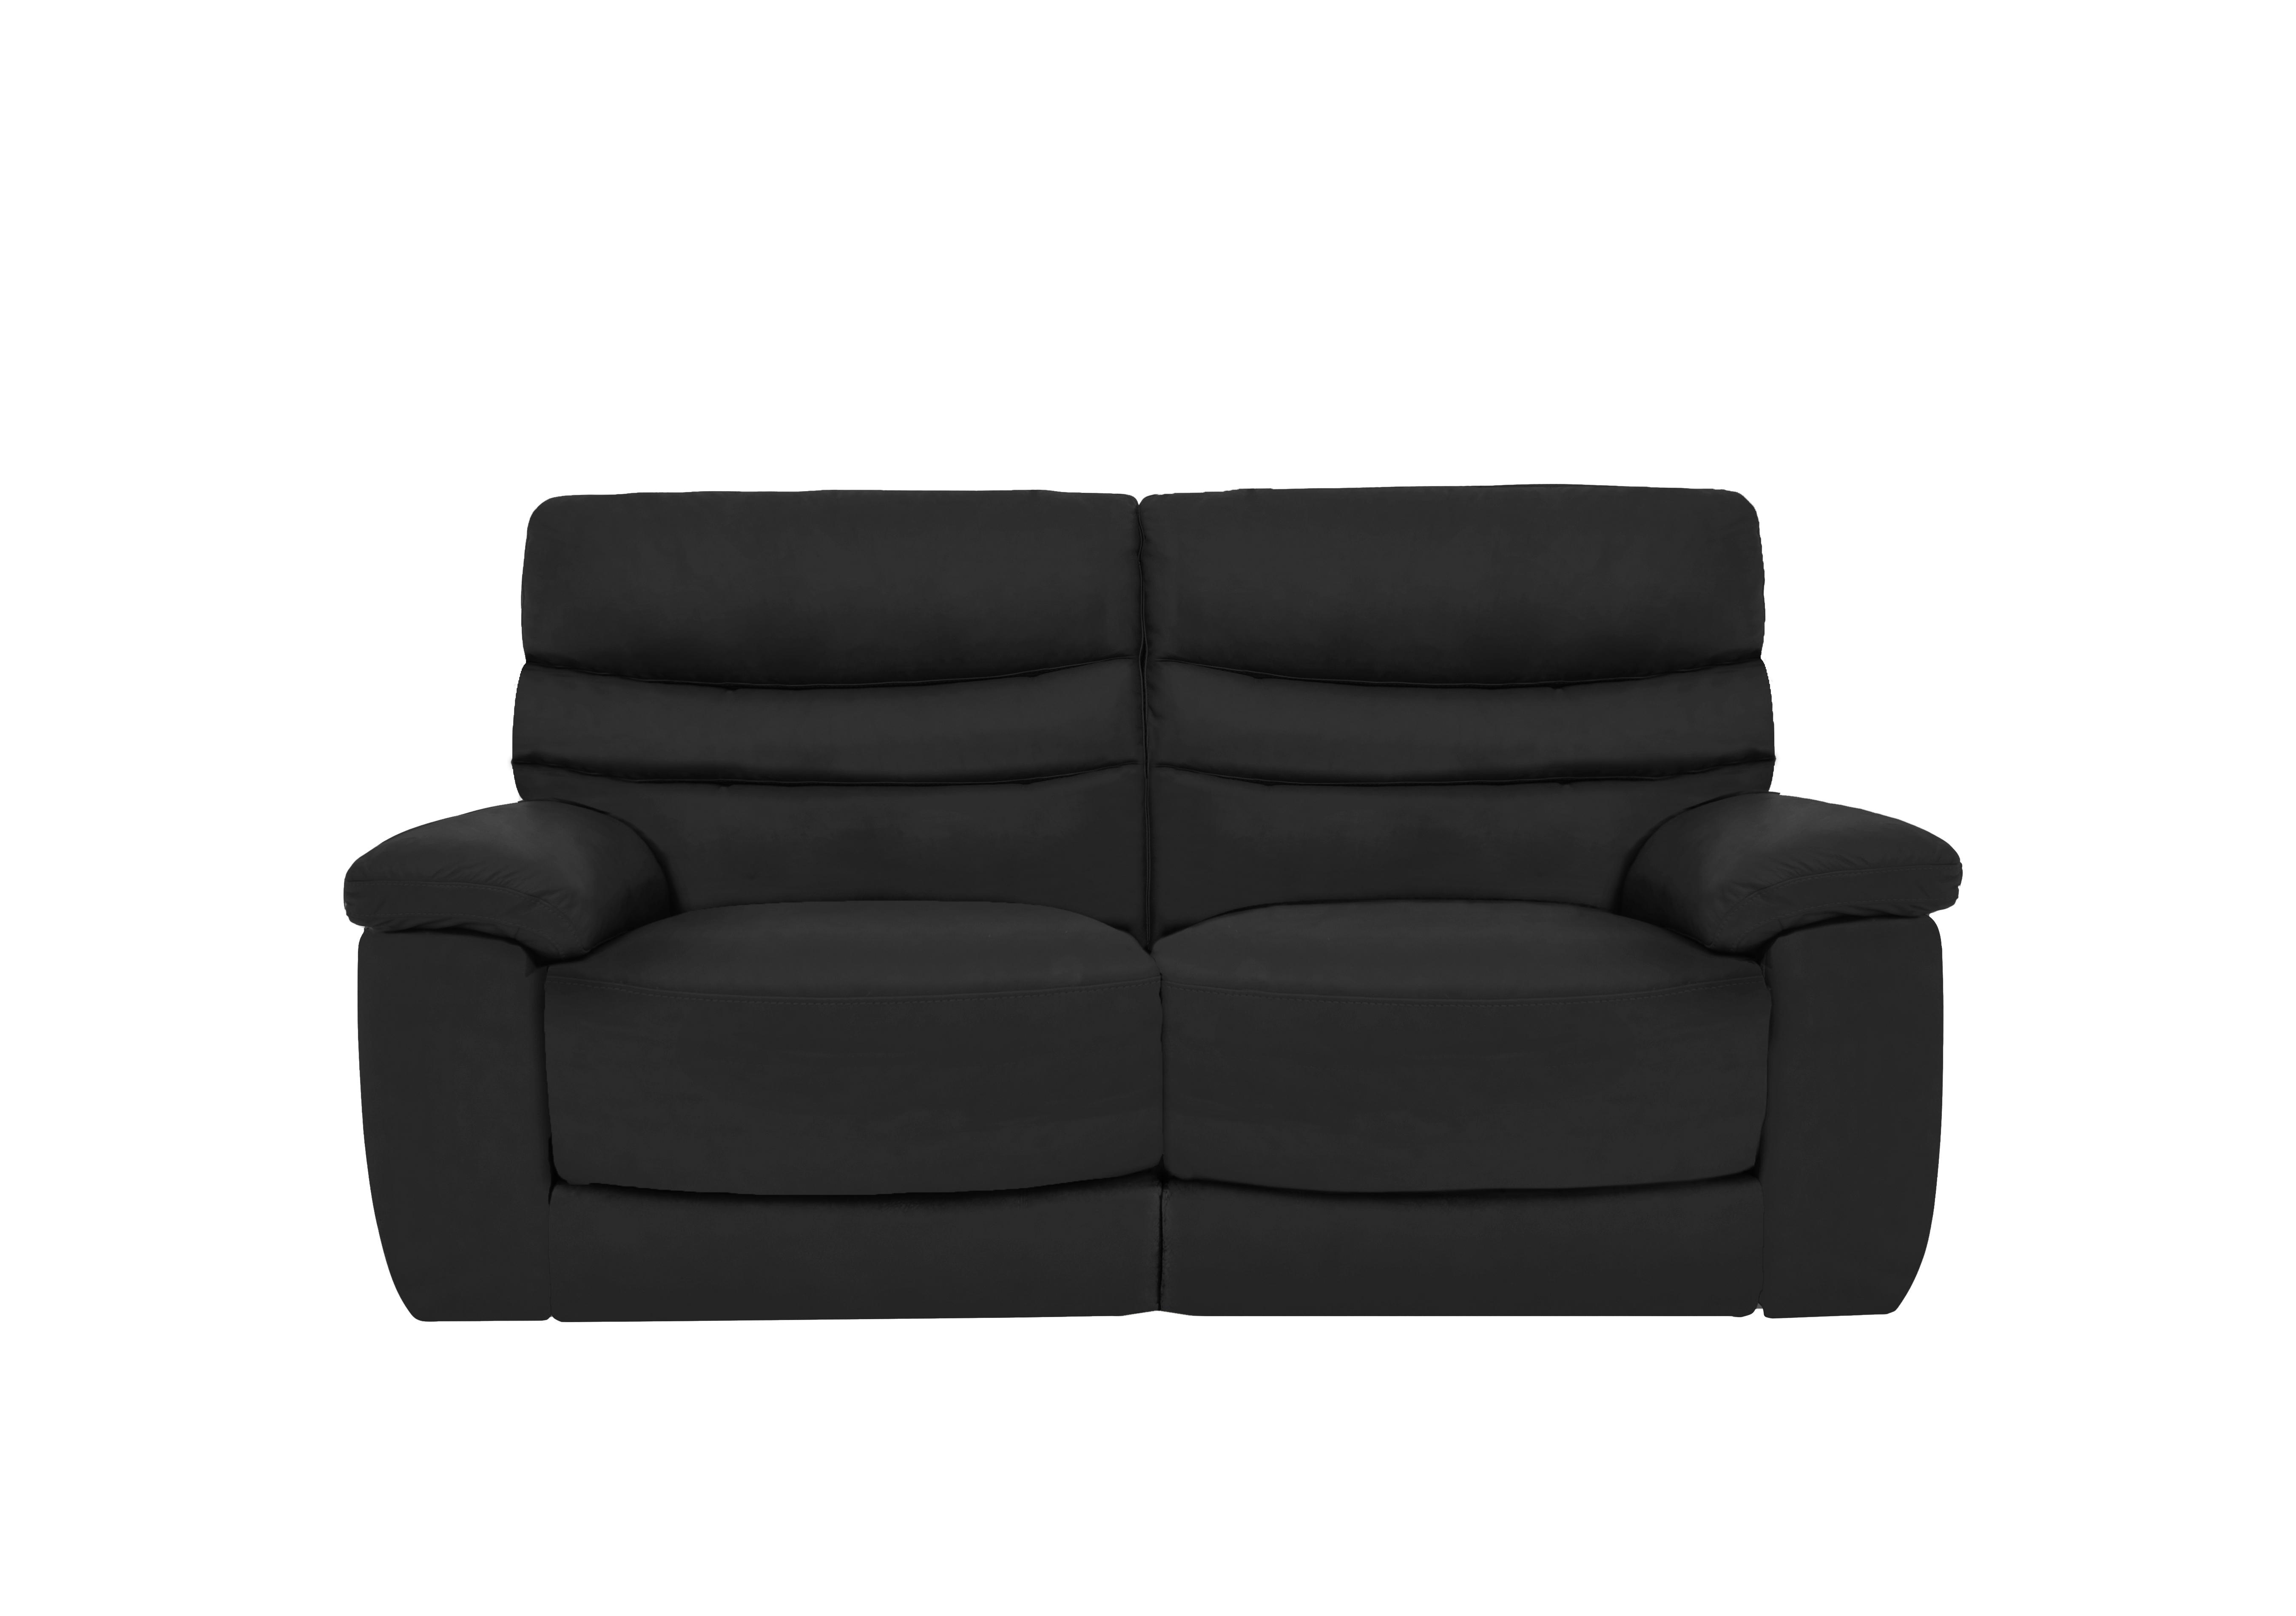 Nimbus 2 Seater Leather Power Recliner Sofa with Power Headrests and Power Lumbar in Bx-023c Black on Furniture Village